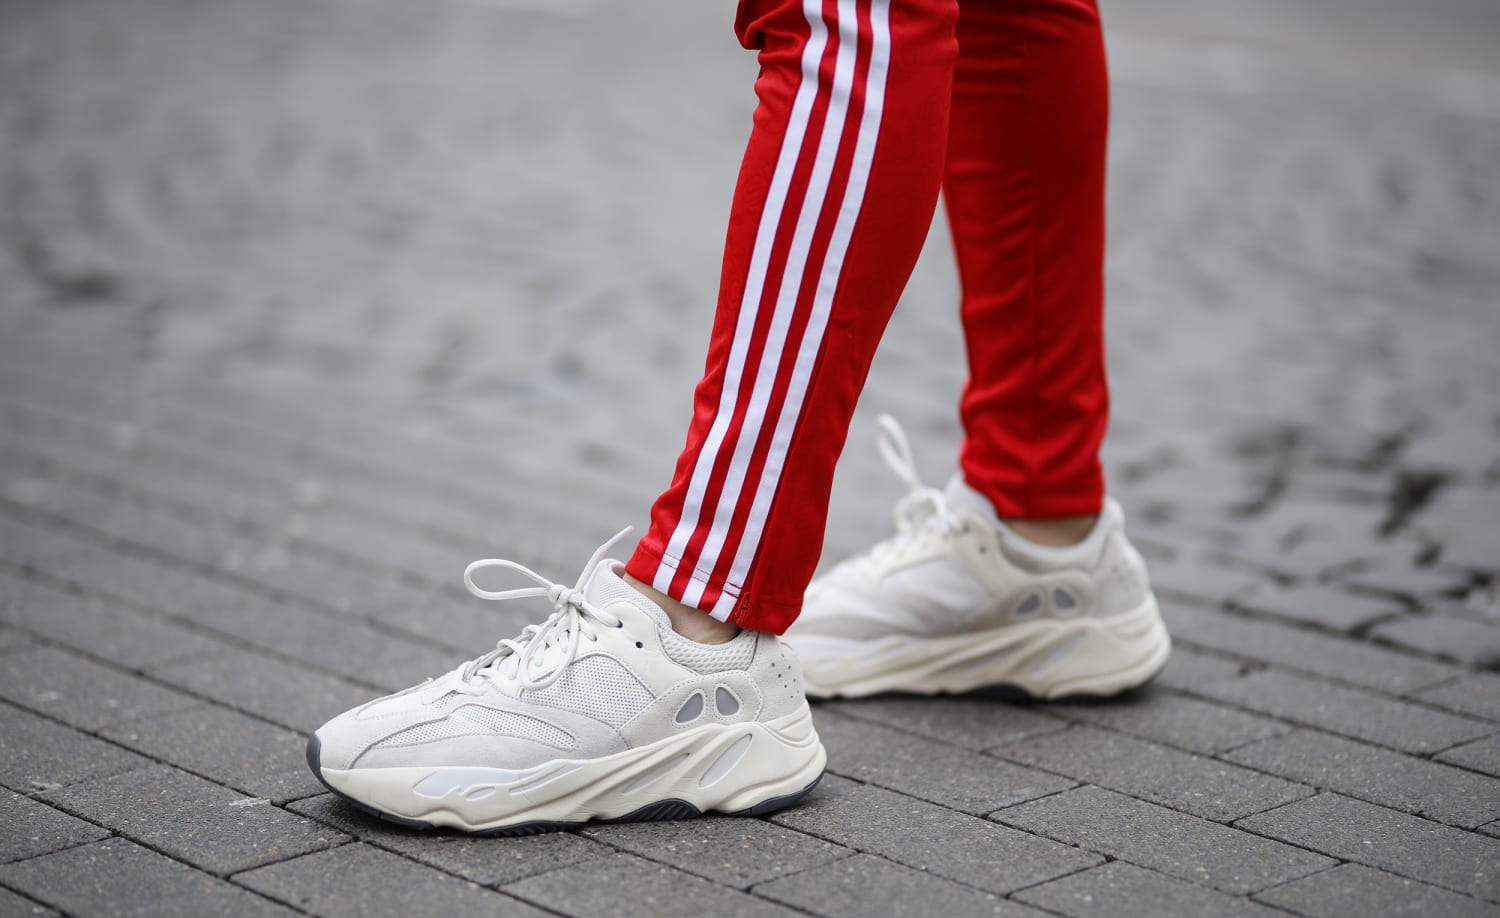 Kanye West Steps Out in An Unreleased Adidas Yeezy Boost 700